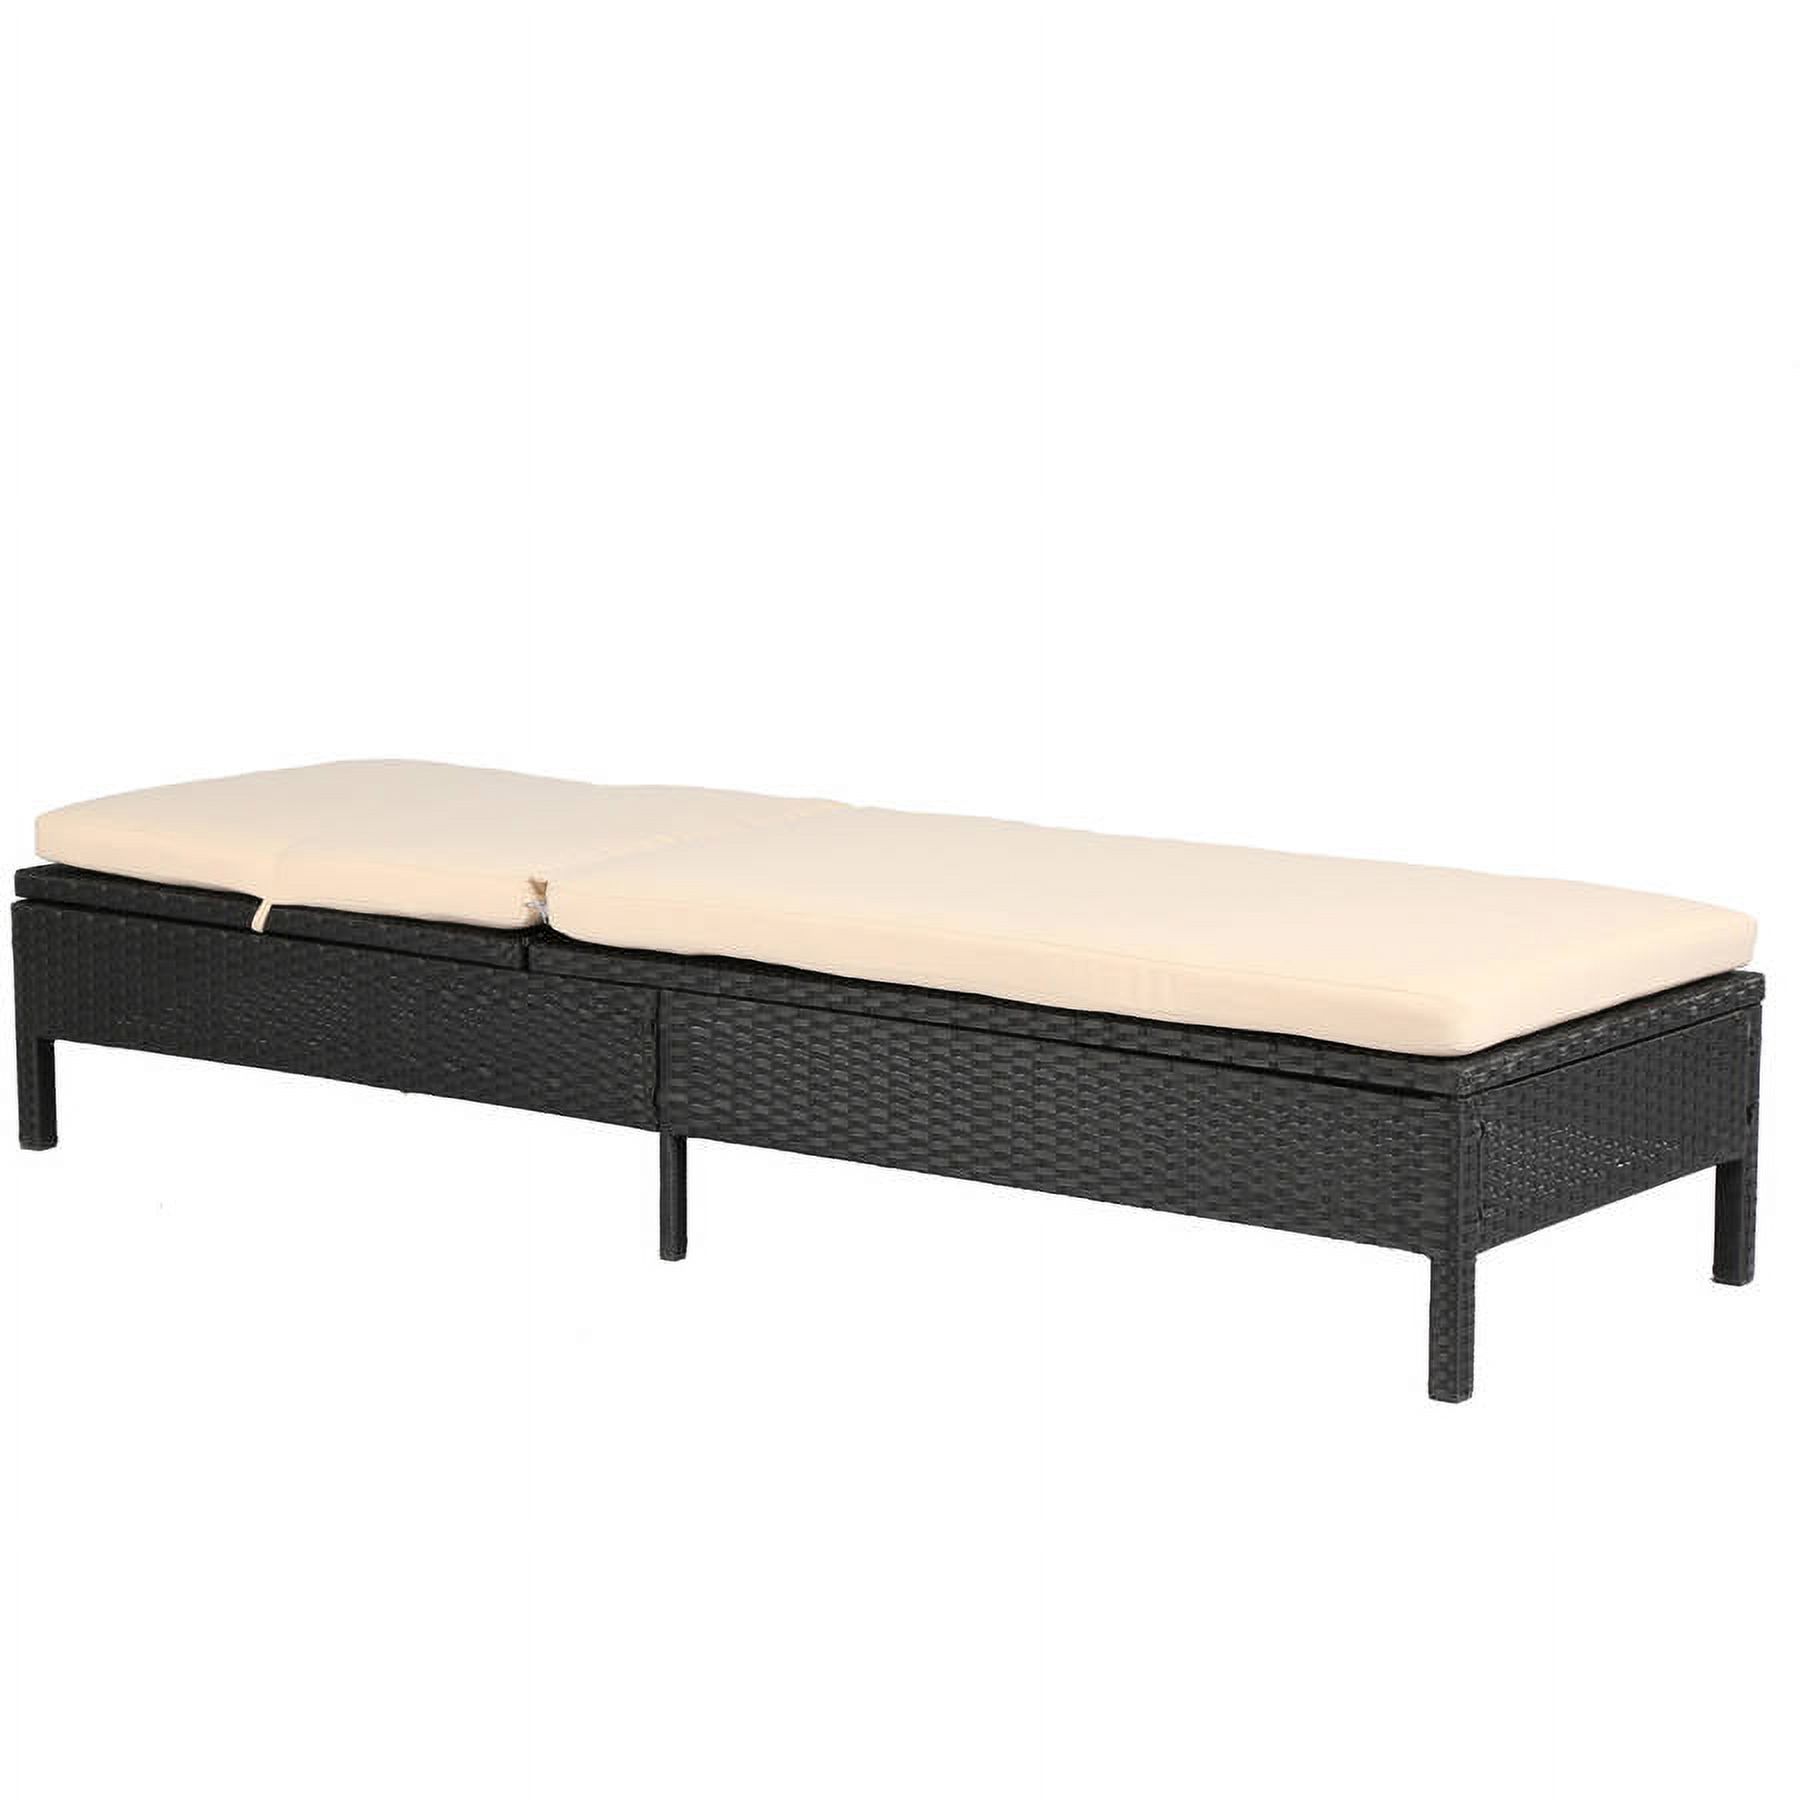 Baner Garden Adjustable Chaise Lounge with Cushions - image 2 of 9